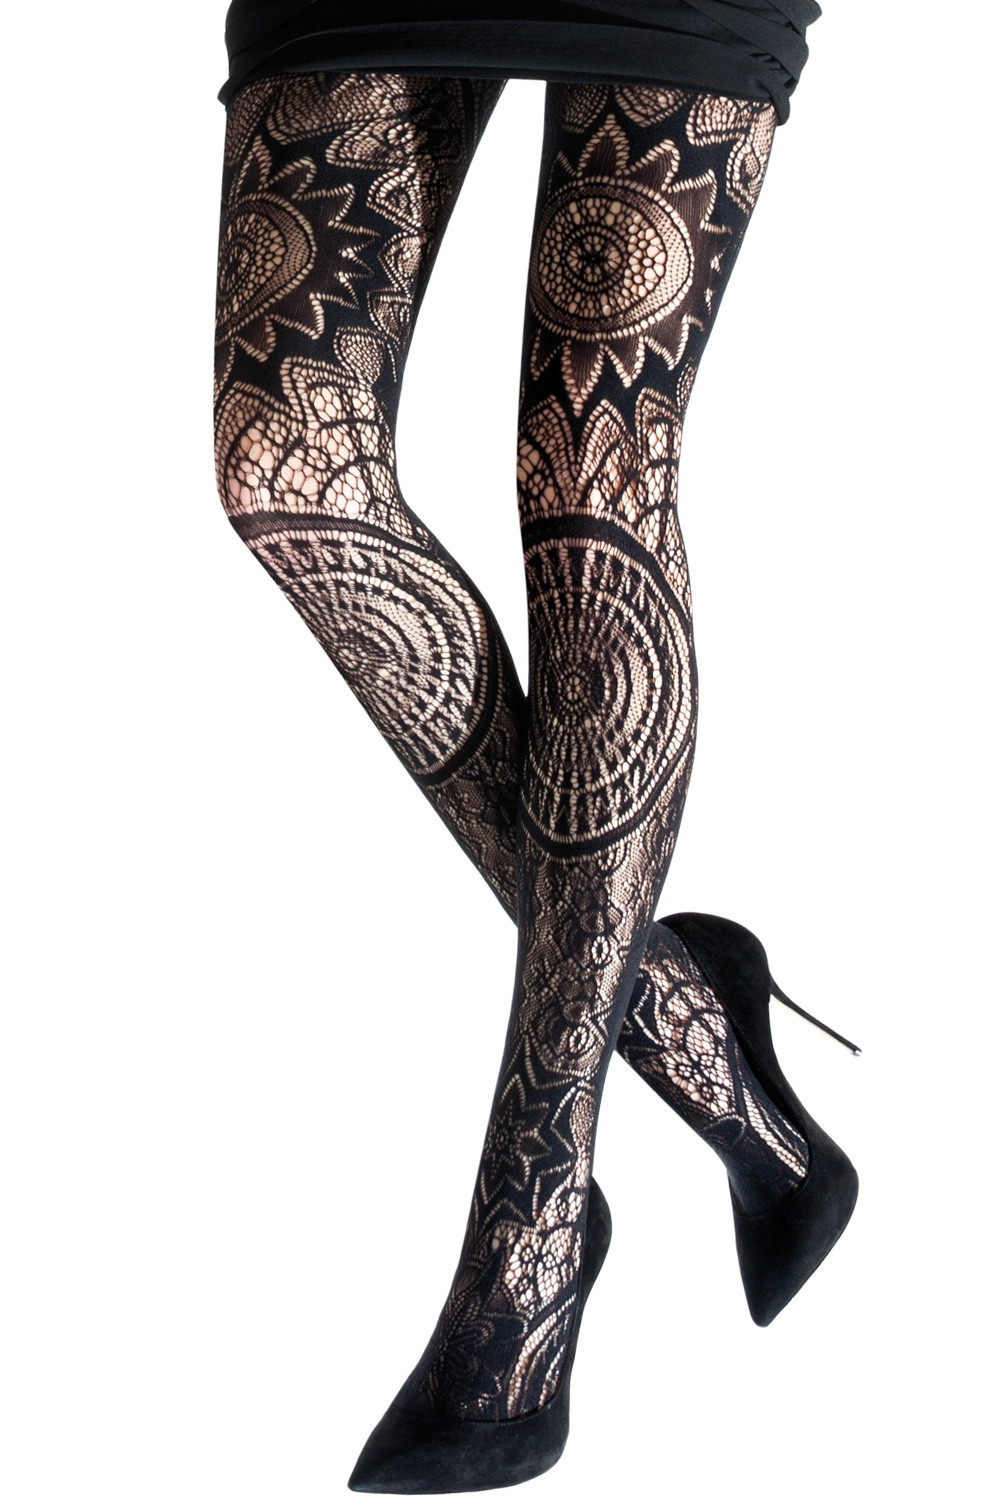 Gothic Lace Thigh High Tights – GenerationMe